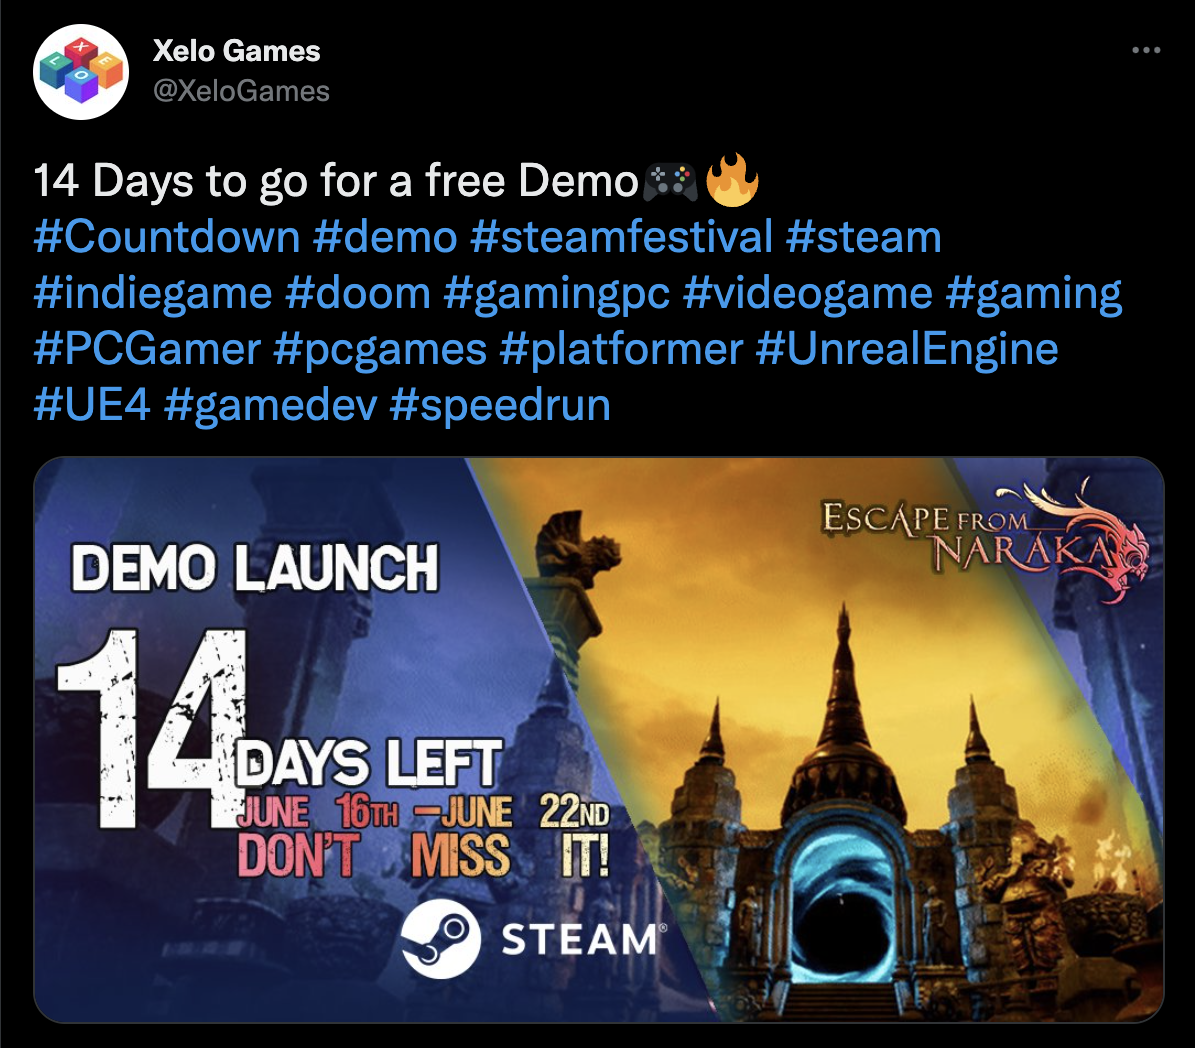 Xelo Games post with countdown for game launch